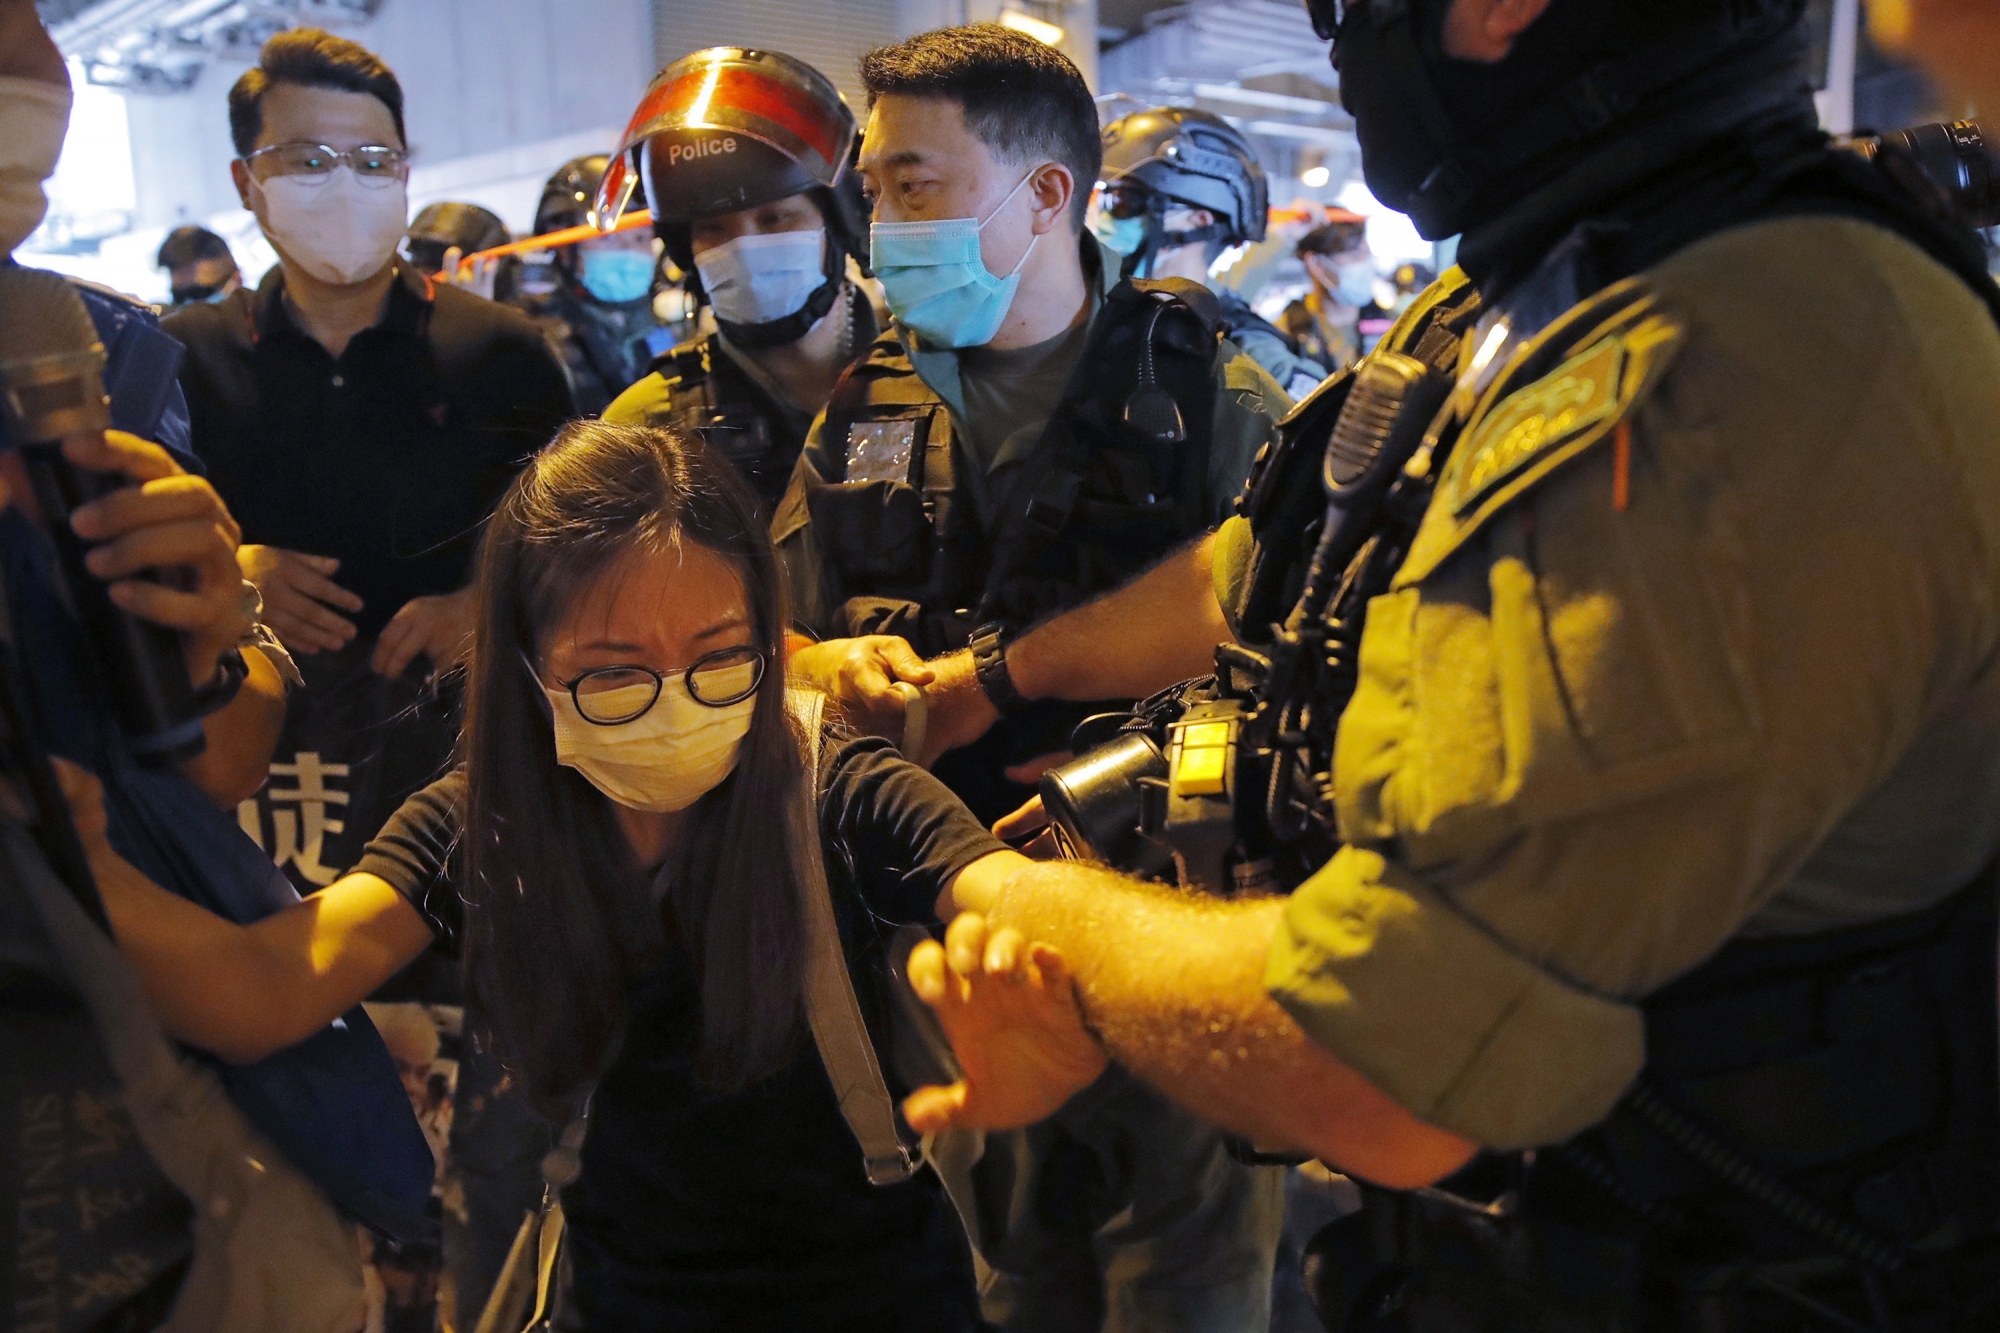 Pro-democracy protesters, front left and rear left, are surrounded by riot police during a news conference to mark one-year anniversary of the Yuen Long subway attack at the subway station in Hong Kong, Tuesday, July 21, 2020. A gang of men in white shirts brutally beat dozens of people inside the train station on July 21 last year. (AP Photo/Kin Cheung) ArcInfo